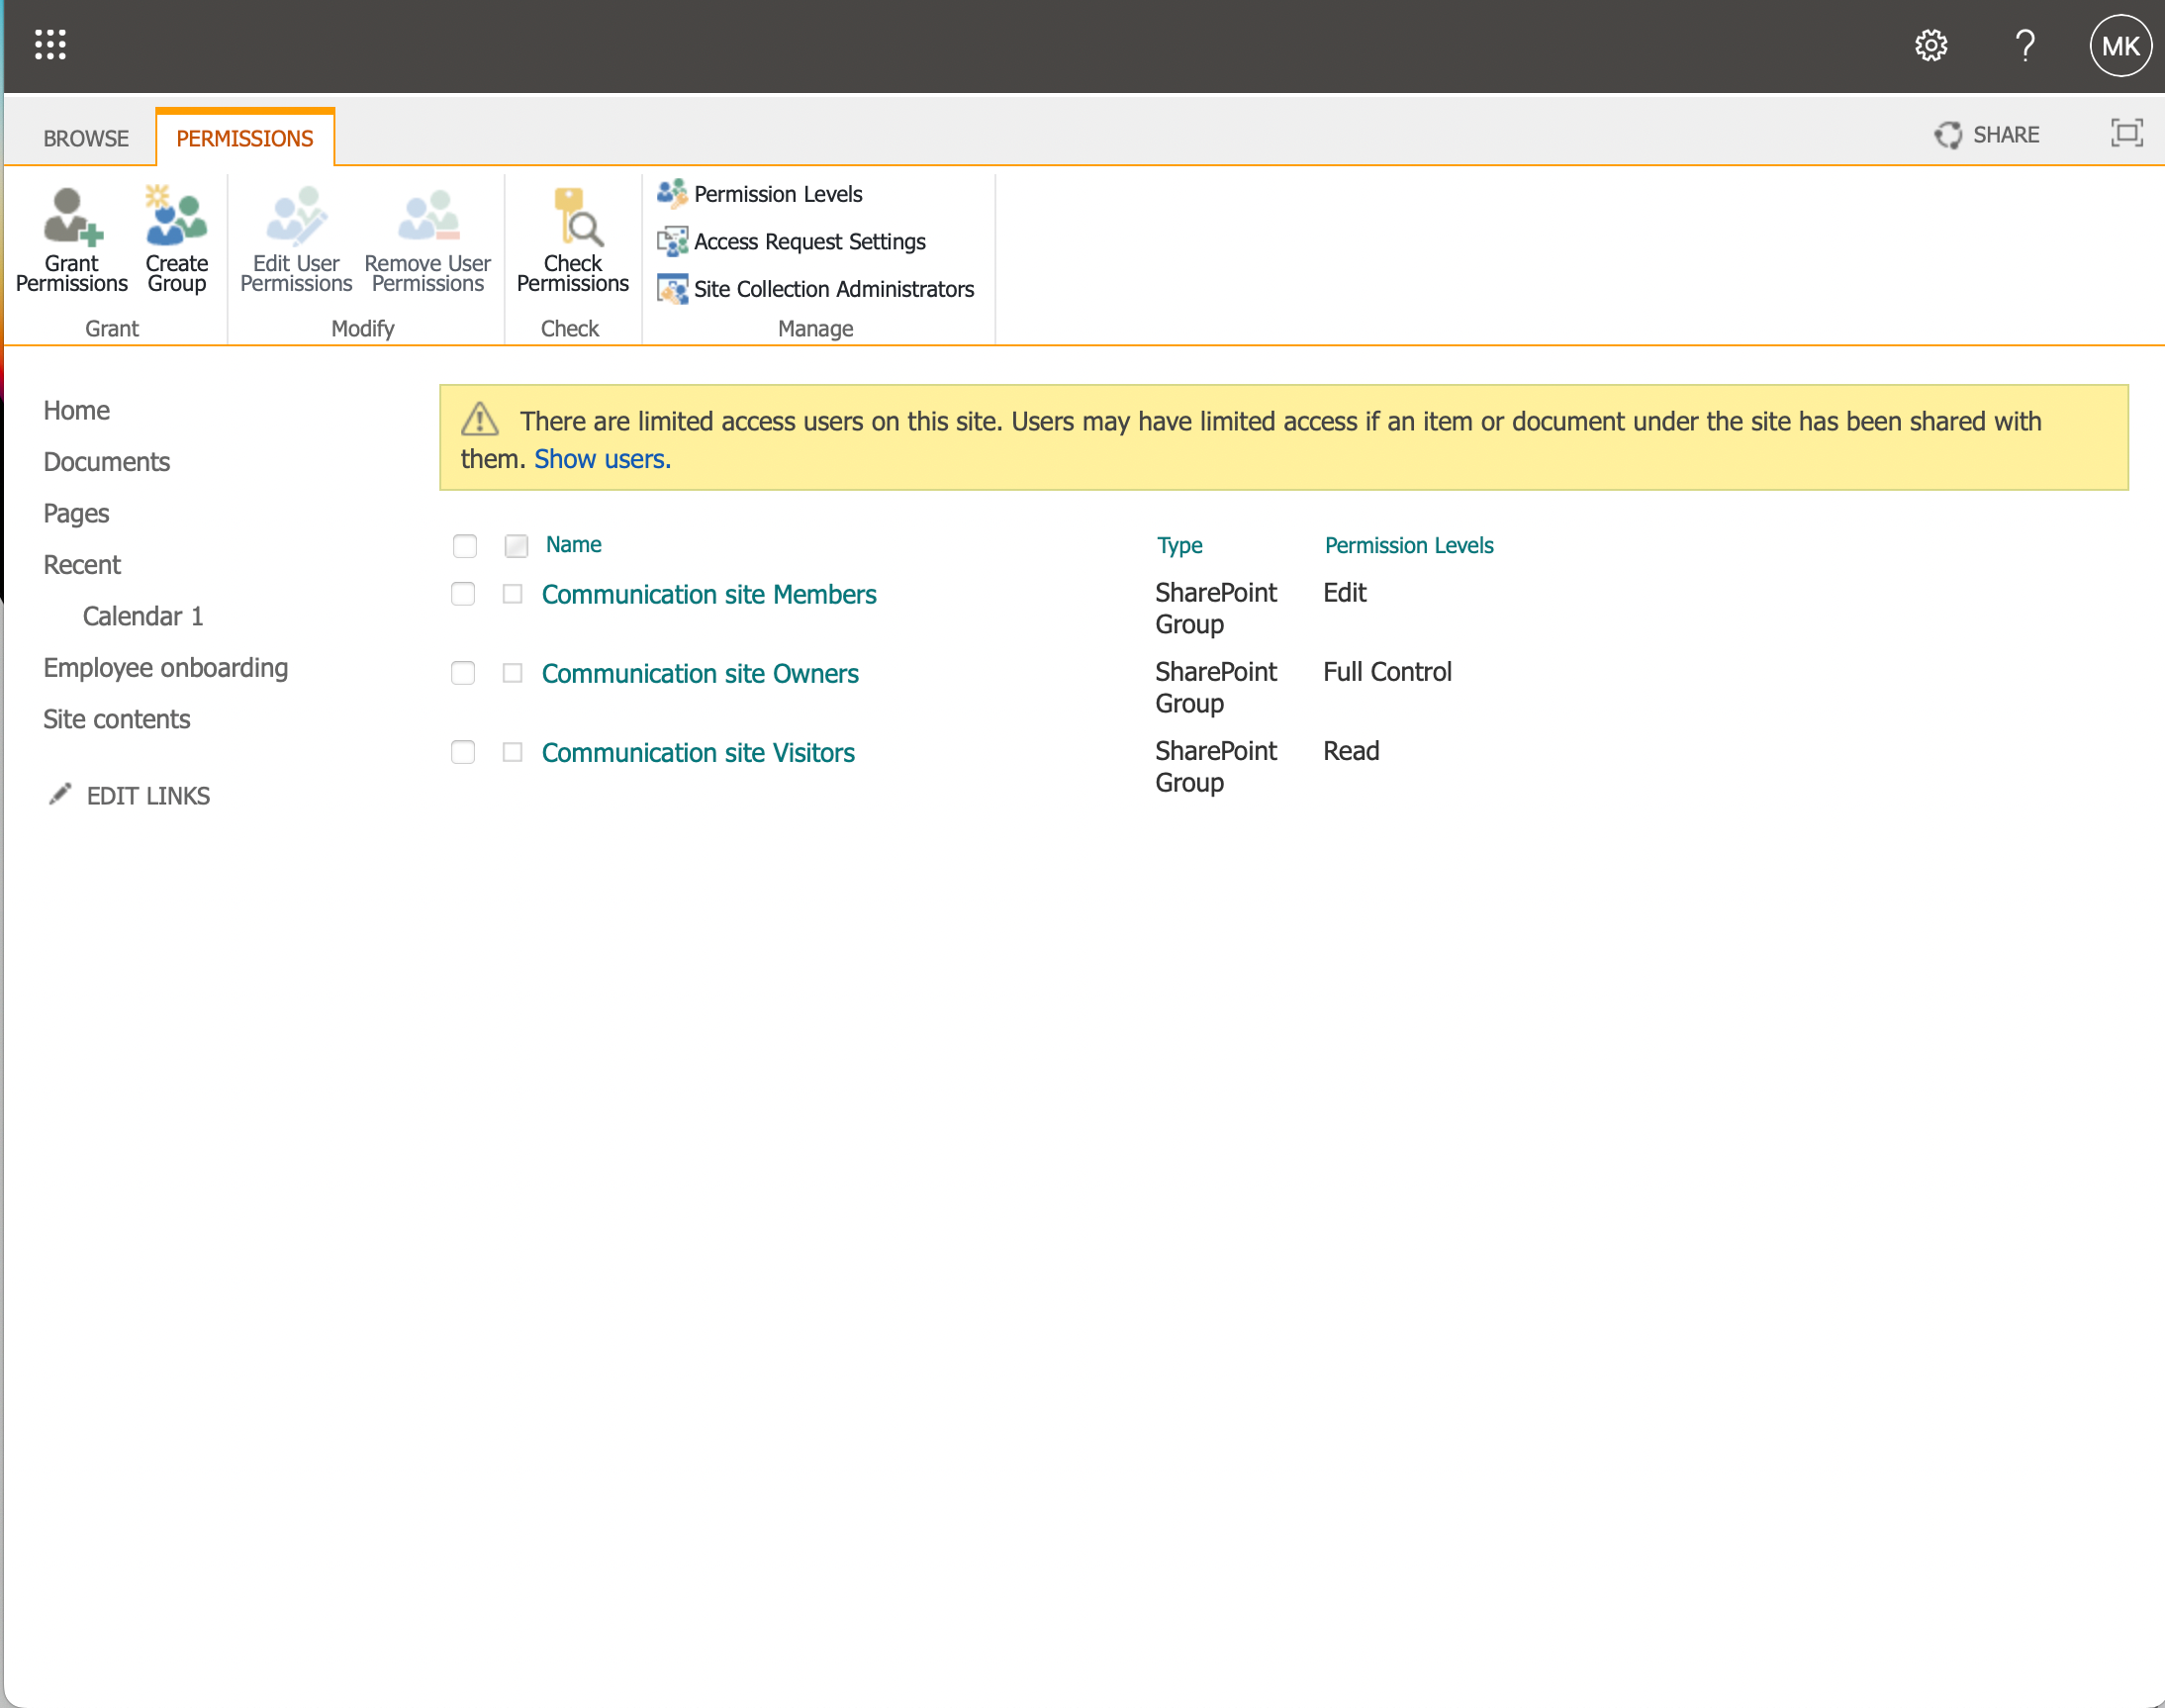 Users and Permissions setting in Sharepoint online